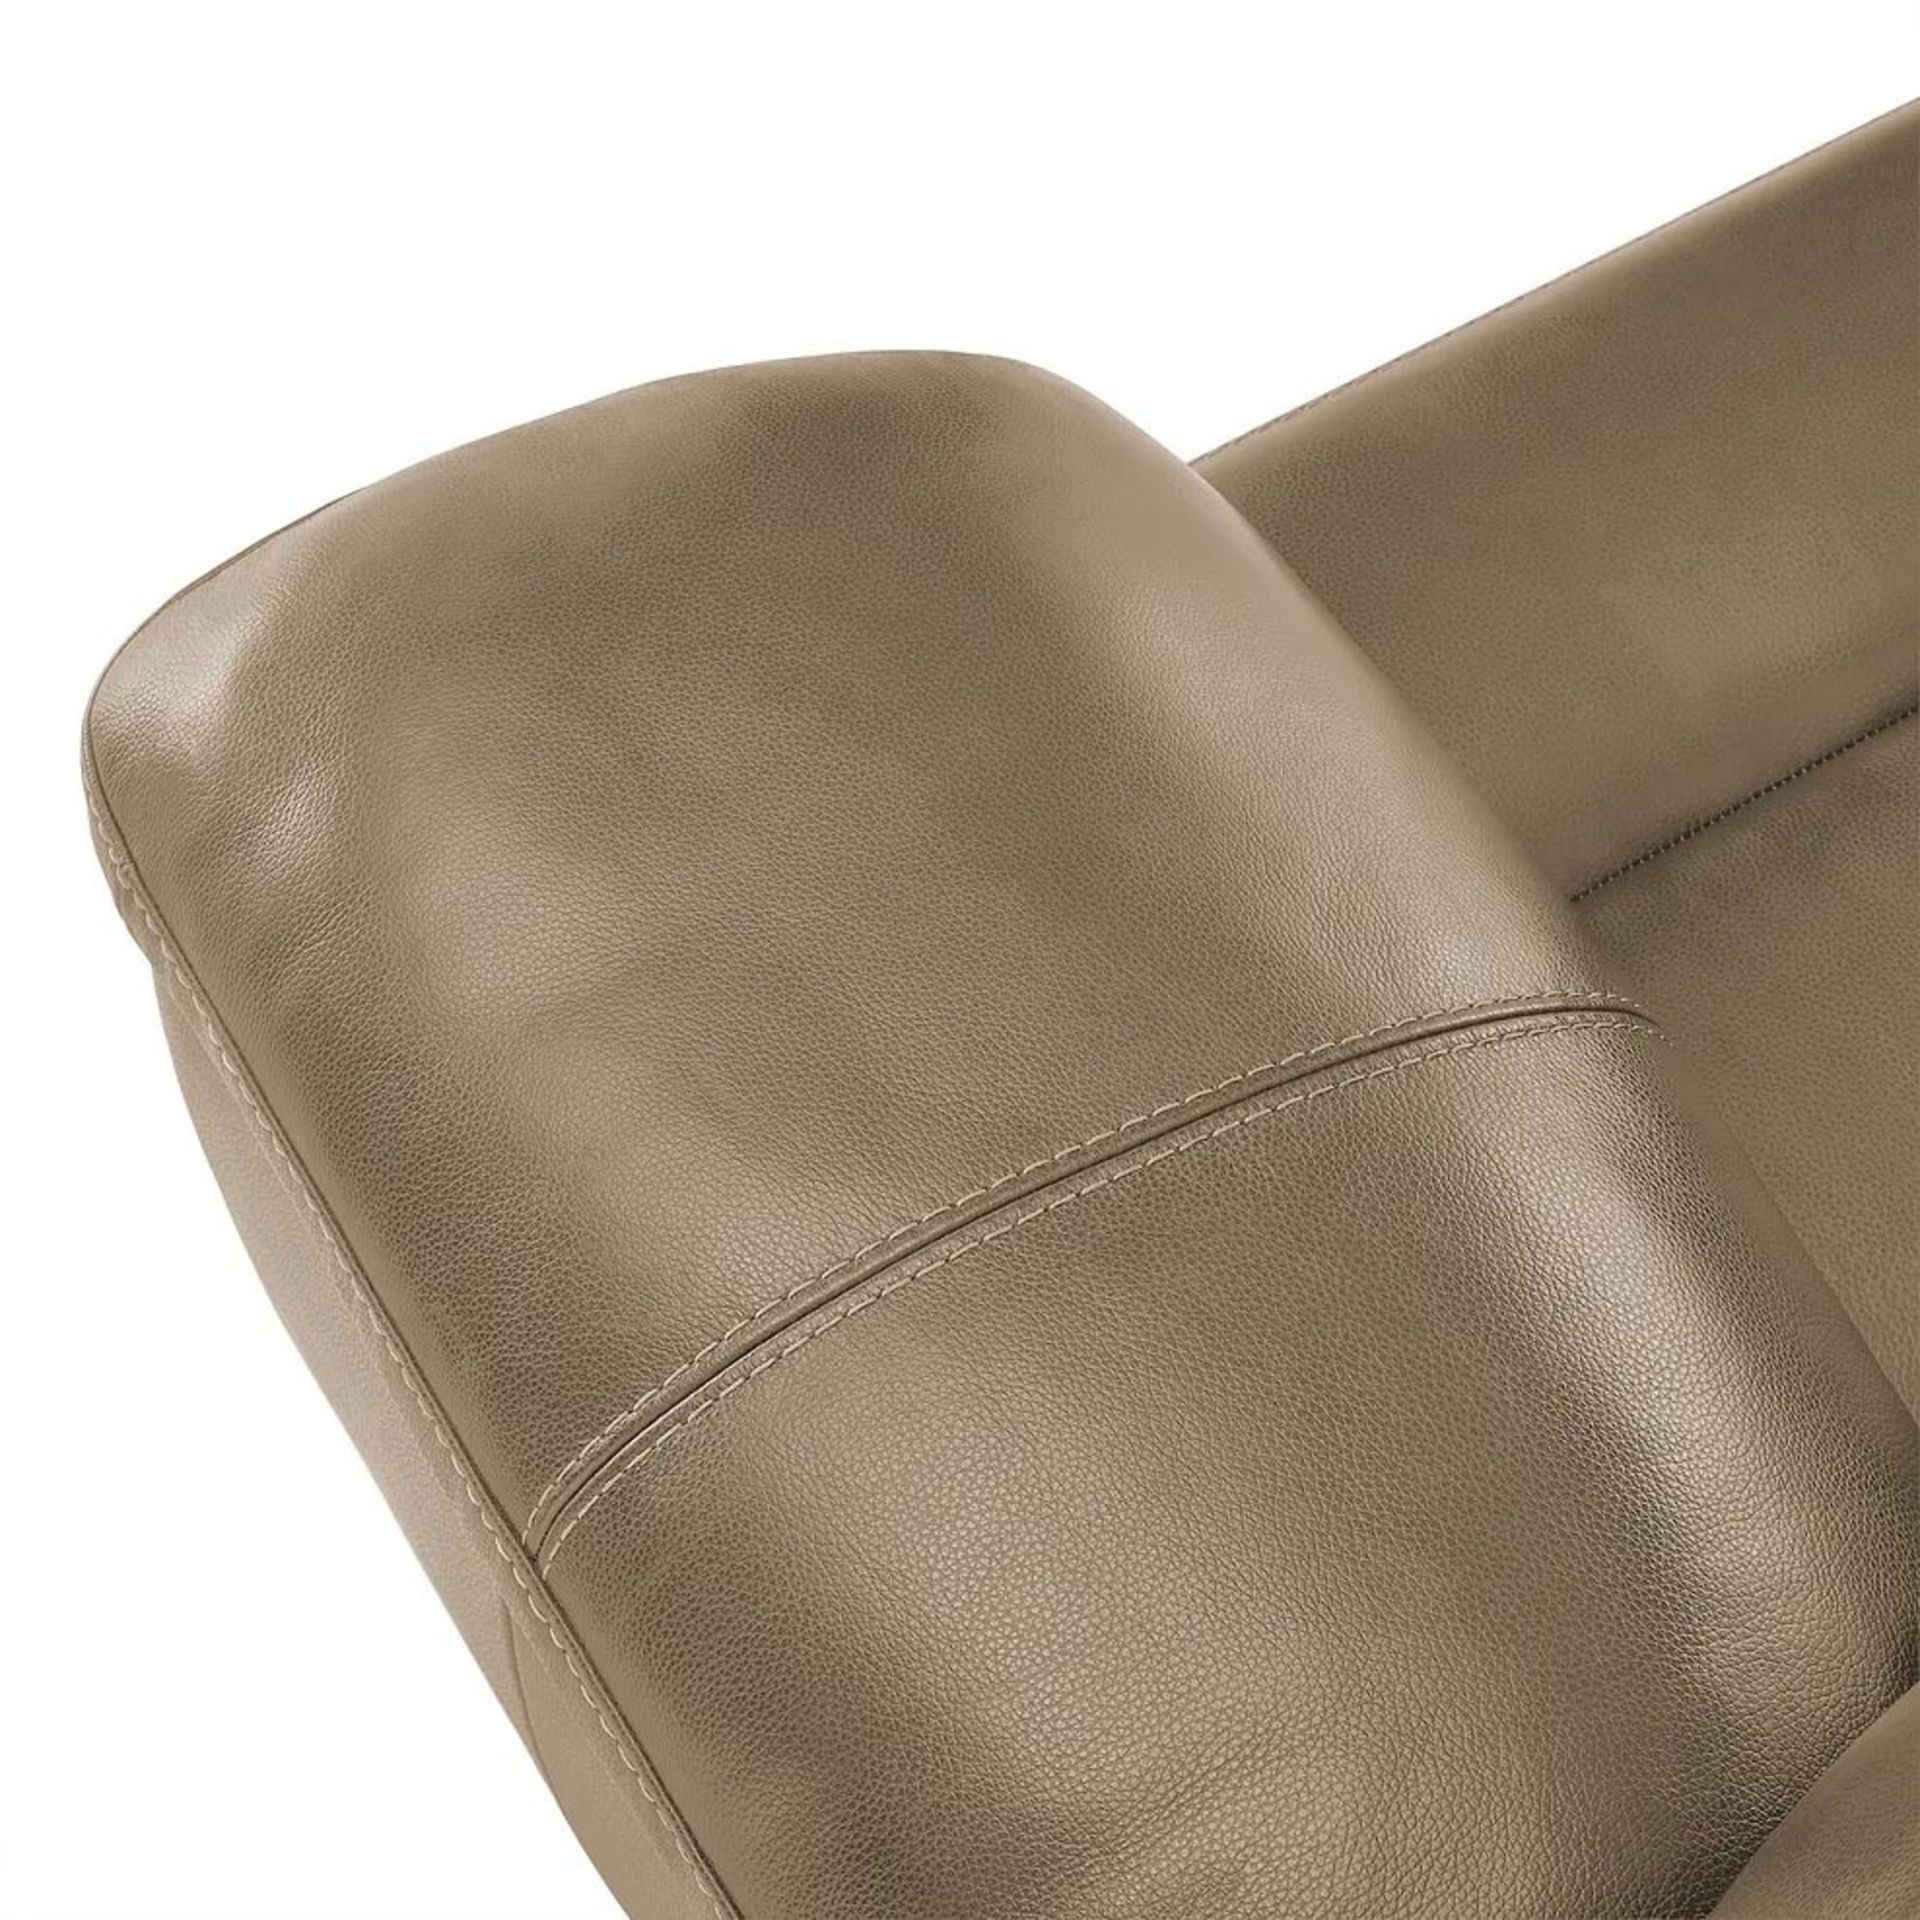 BRAND NEW ARLINGTON Armchair - BEIGE LEATHER. RRP £1099. Create a traditional and homely feel in - Image 7 of 9